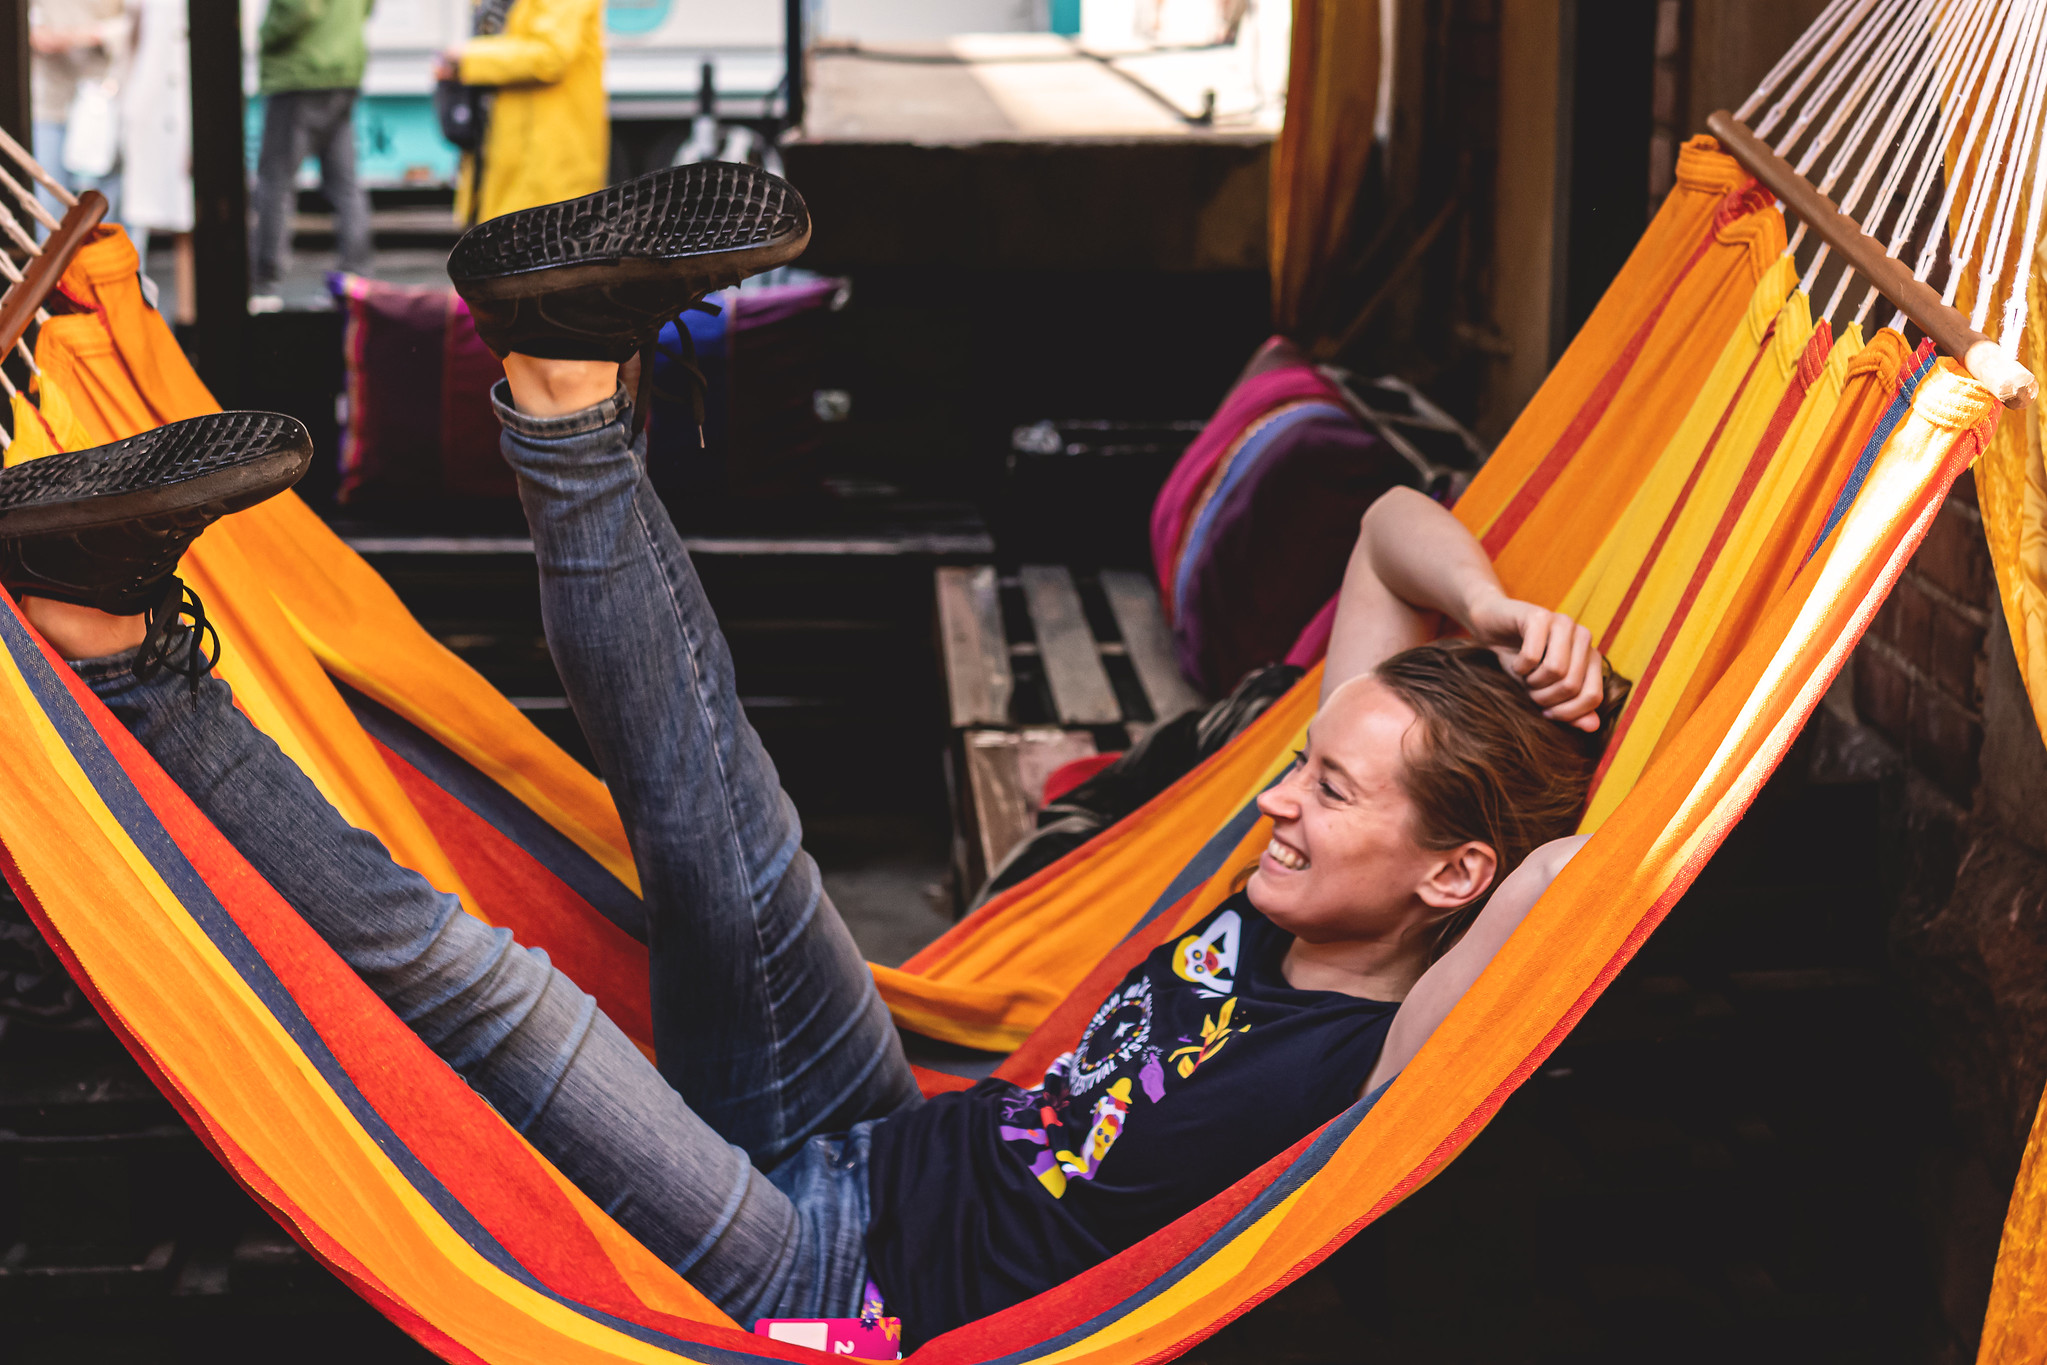 A person wearing a festival t-shirt happily lounging on a hammock.